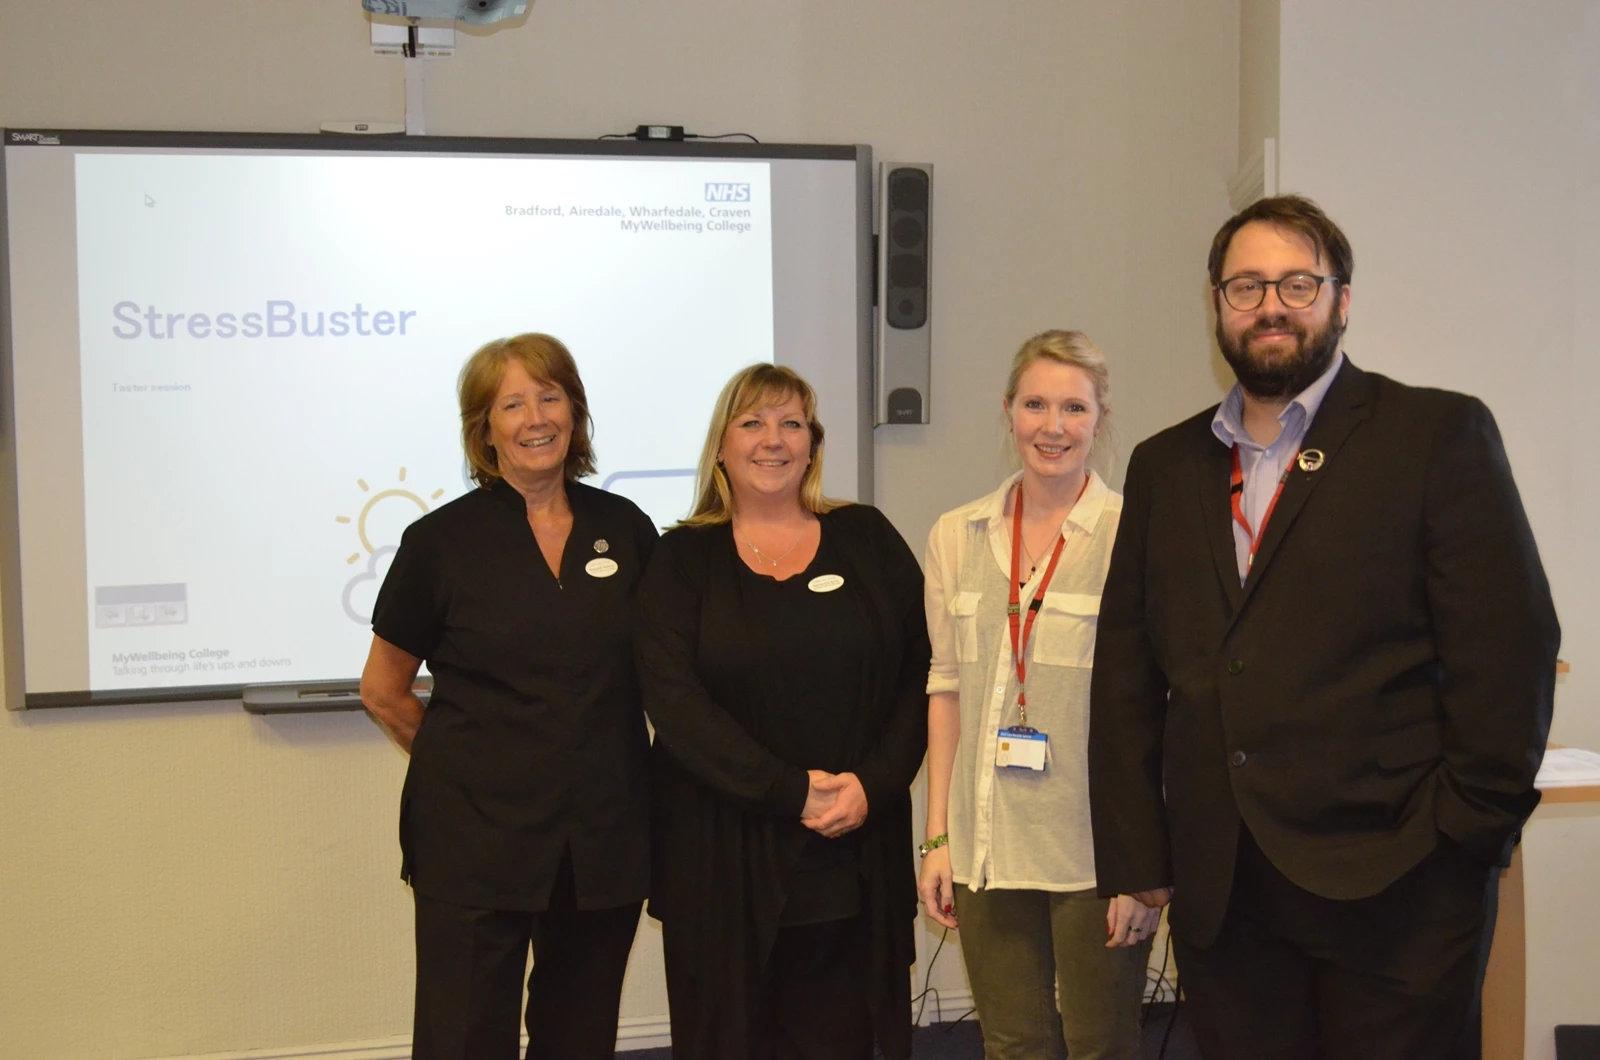 Margaret Watkins, Training Manager Czajka Care Group, Sam Birch, Deputy Training Manager at Czajka Care Group with Donna Wooler and David Lee who are both from My Wellbeing College, which is part of Bradford District Care Foundation Trust.